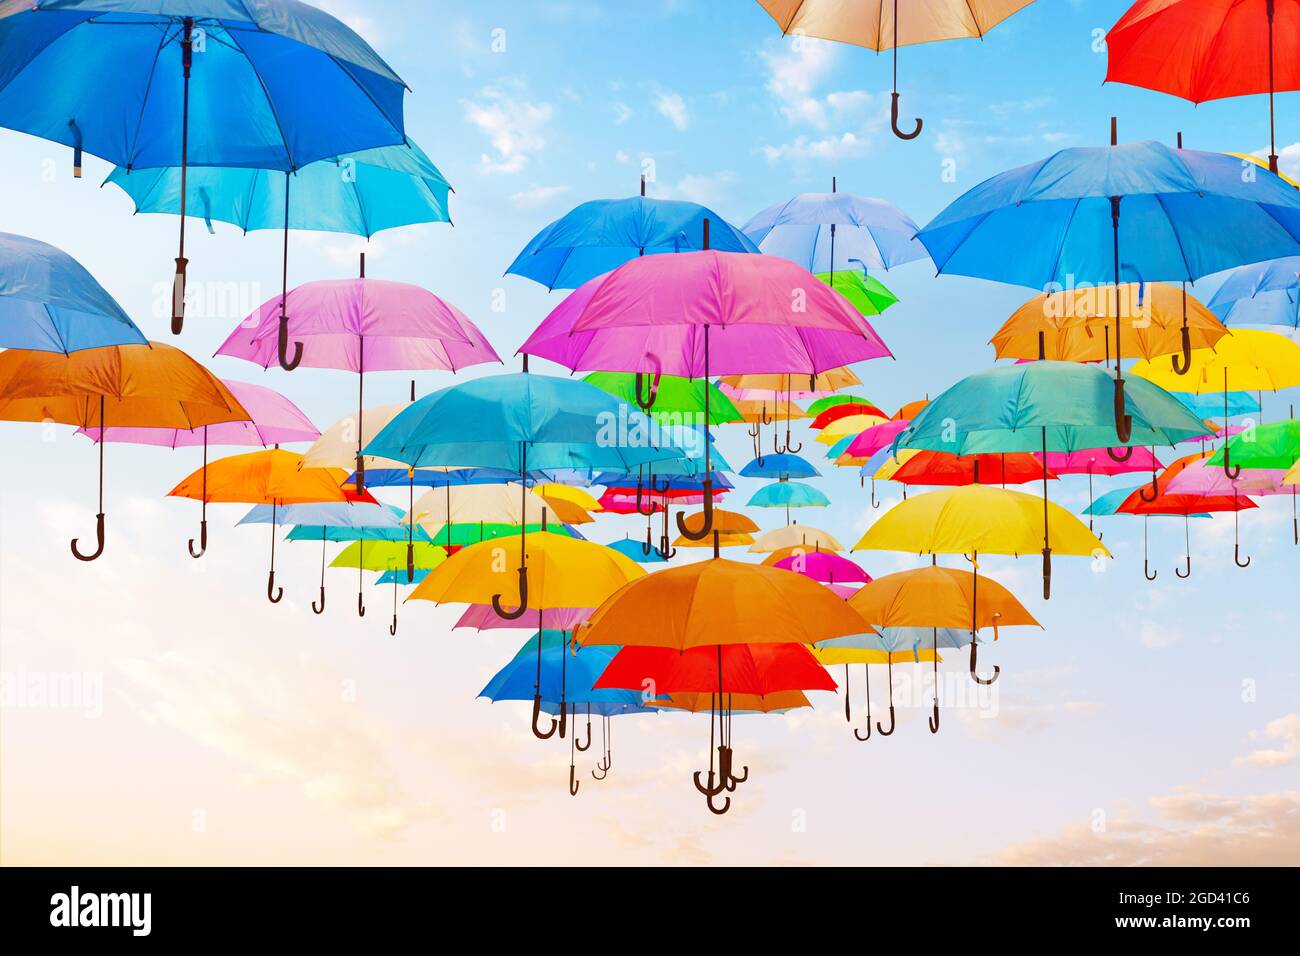 Abstract design of Colorful umbrellas in the sky. Stock Photo